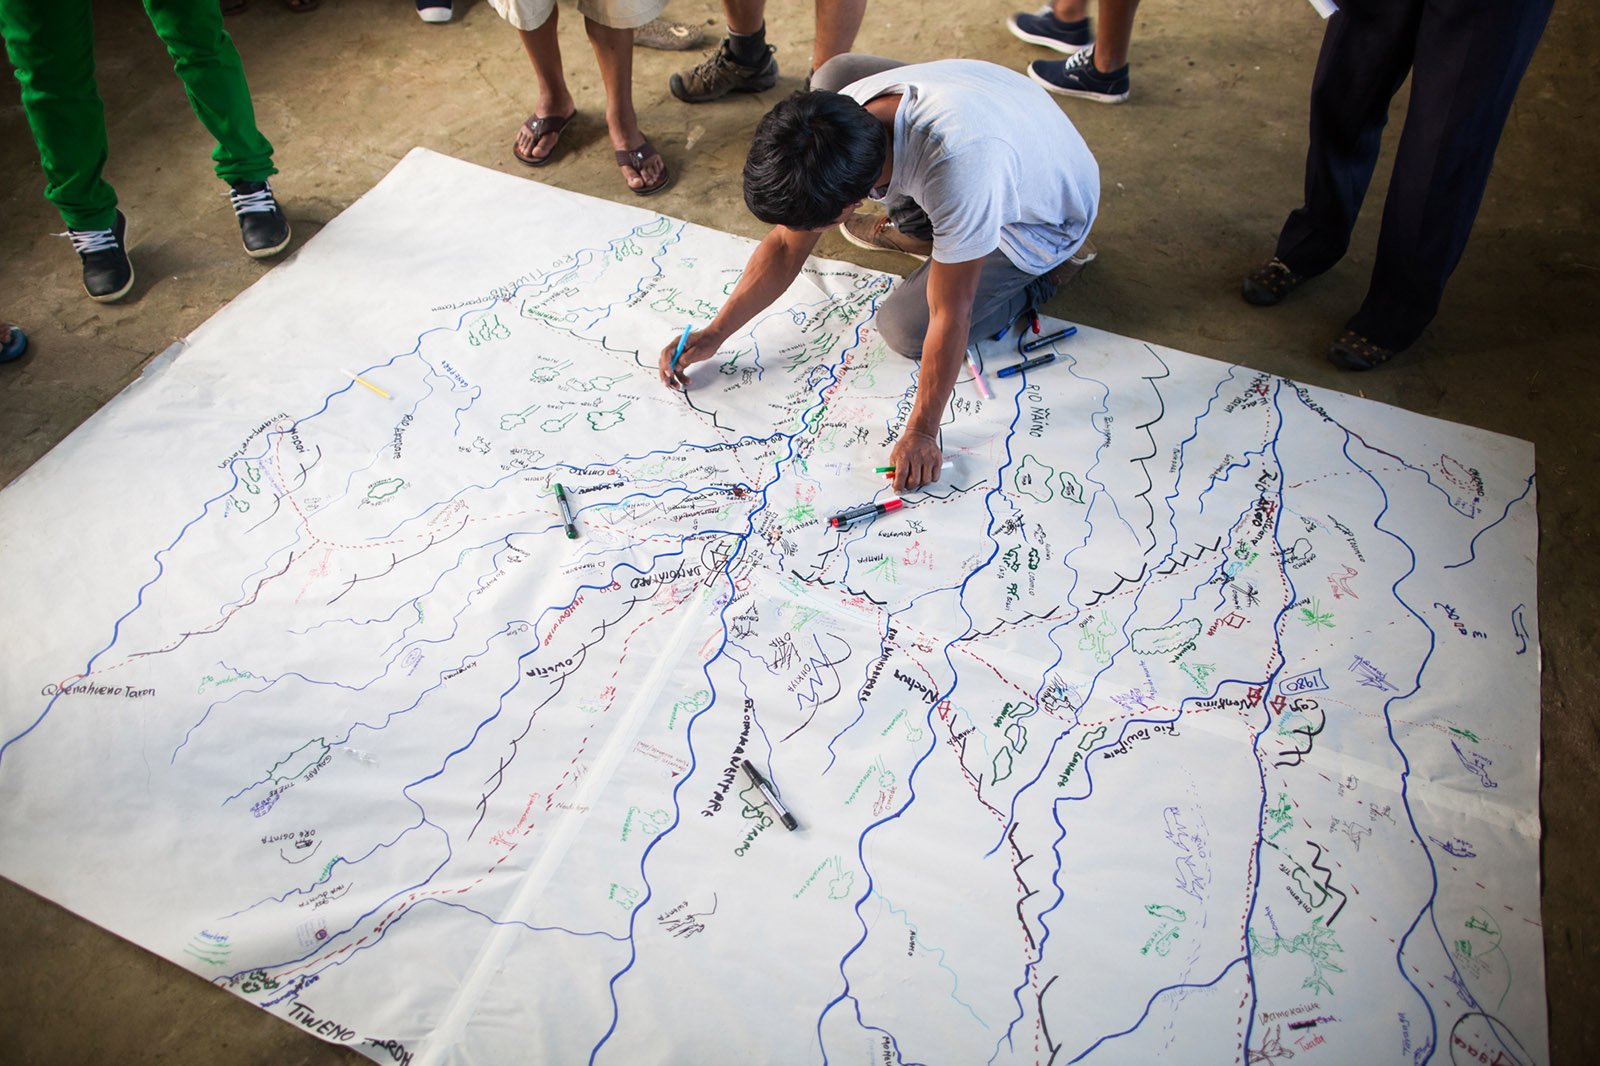 As a strategy of resistance, from 2015-2018, Waorani youth and elders set out to document and demonstrate life in their territory by creating a “living map” of their connection to the land.